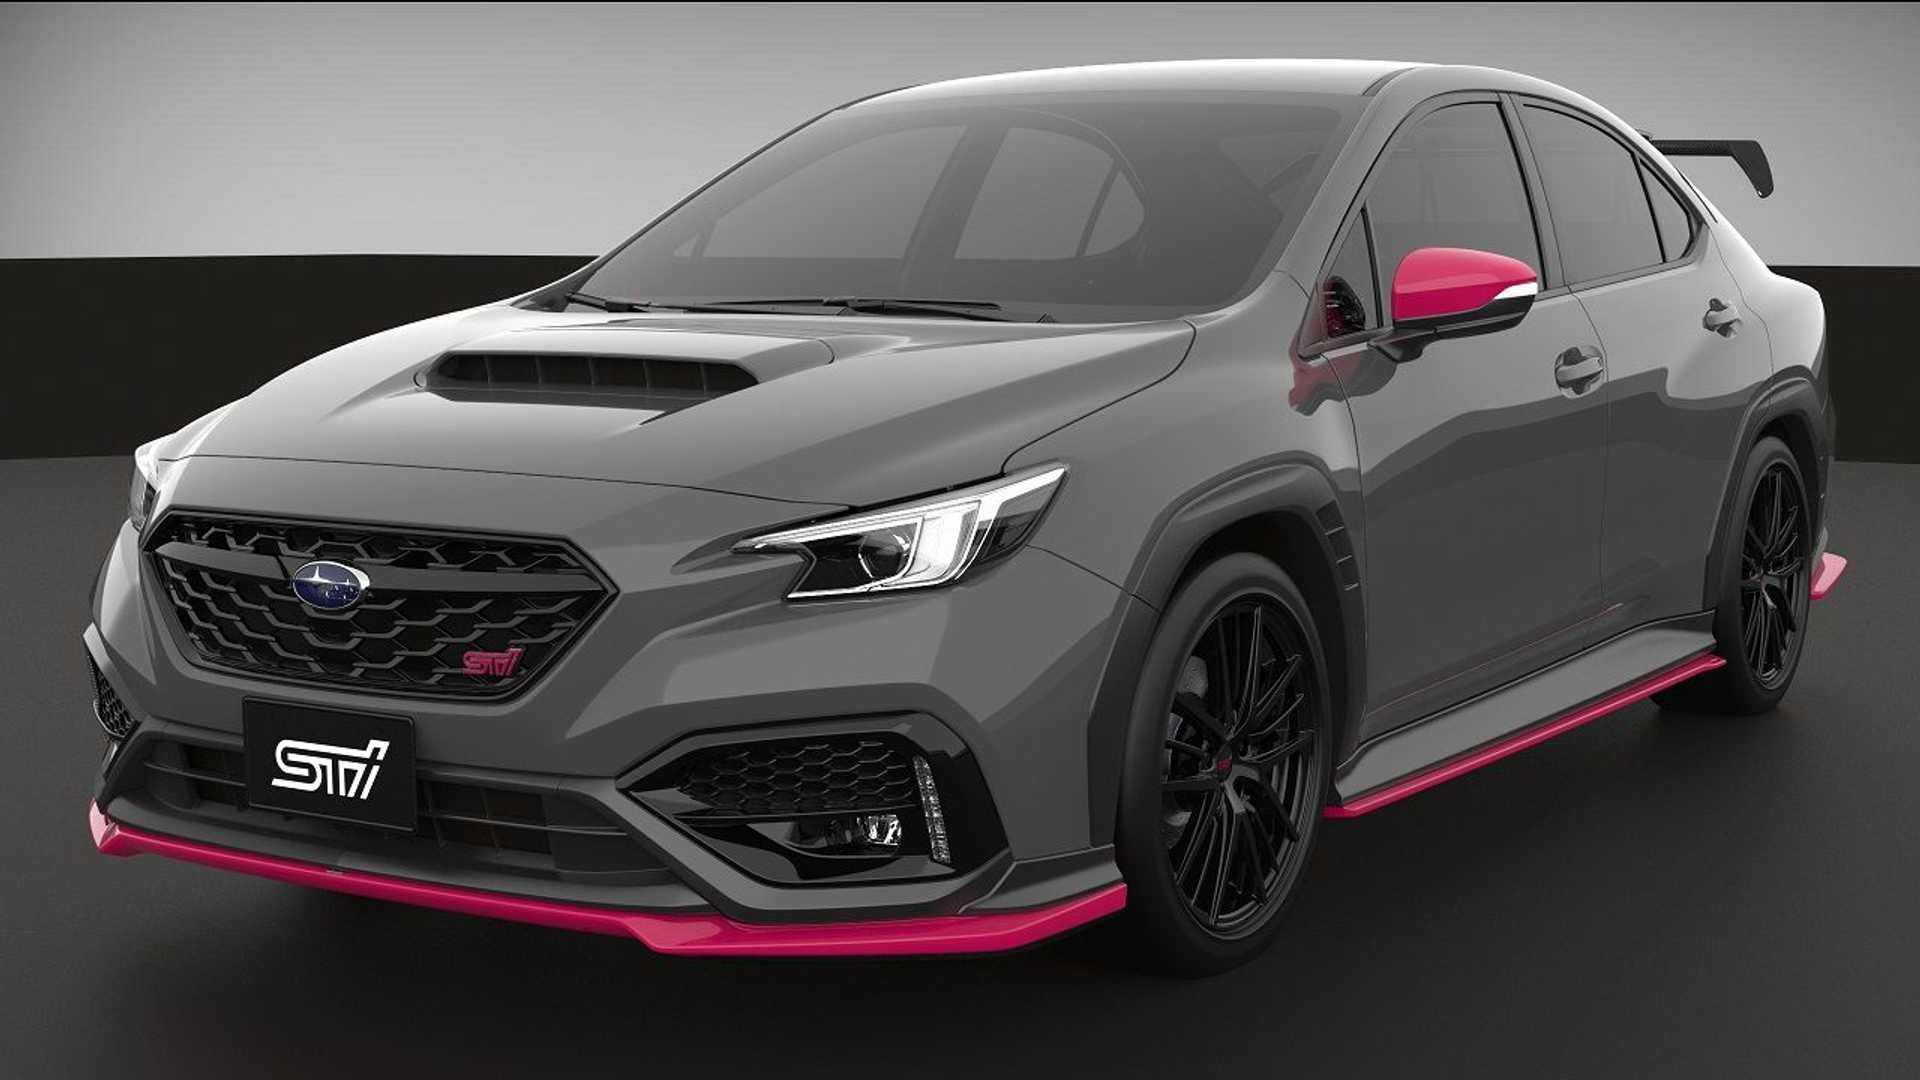 first details of the electric STI